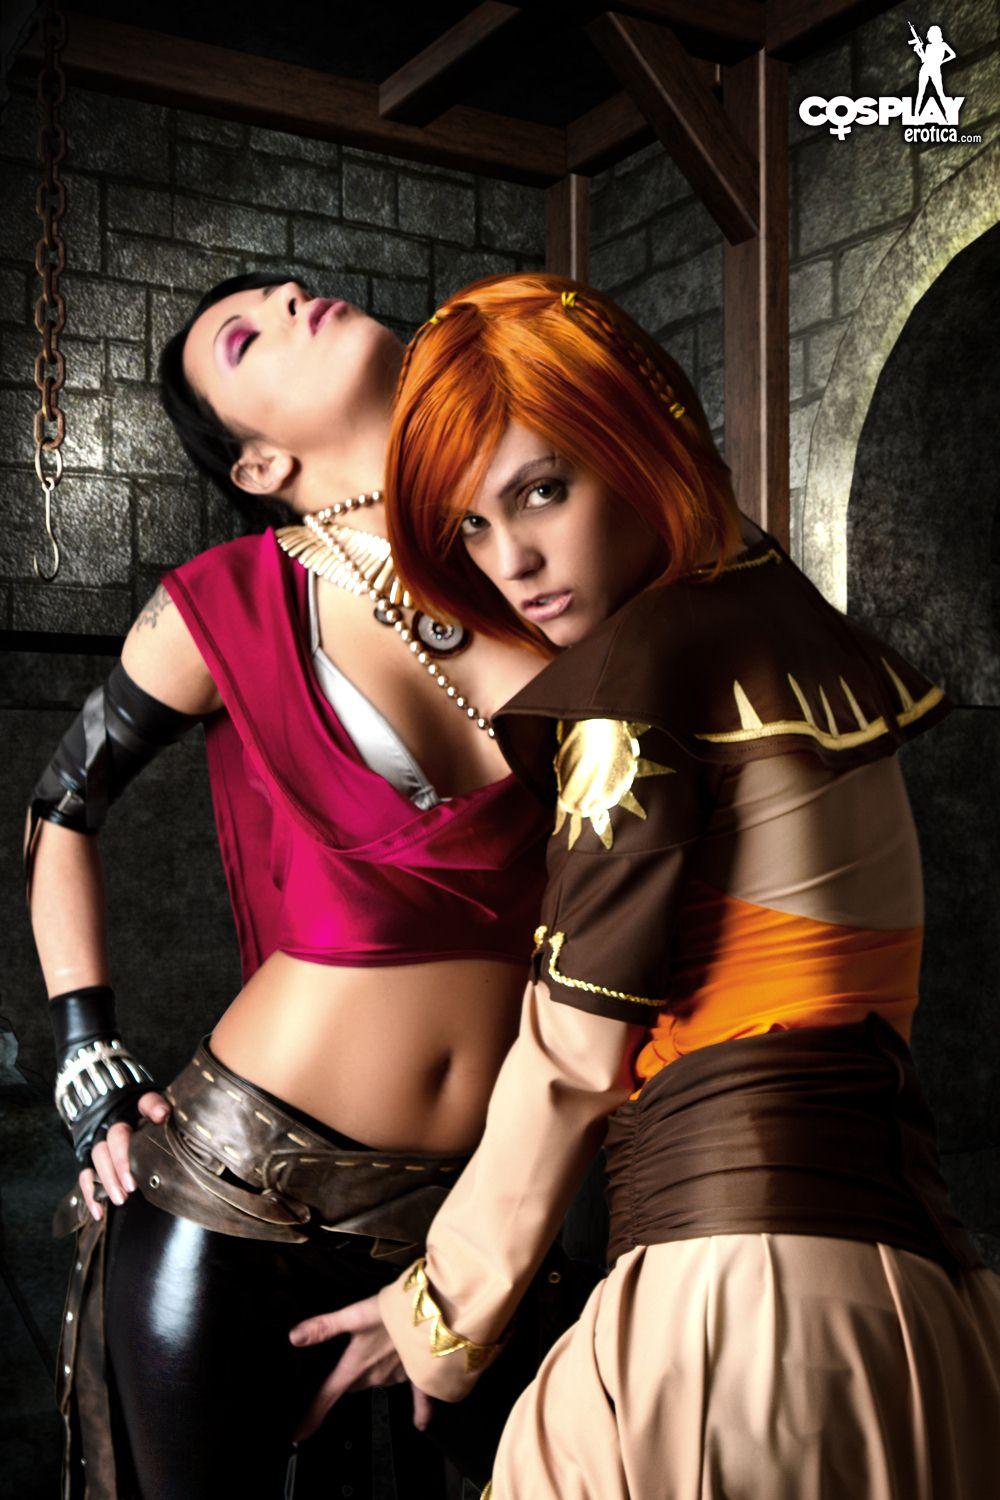 Pictures of Nayma and Mea doing a hot lesbian Dragon Age cosplay #59444503